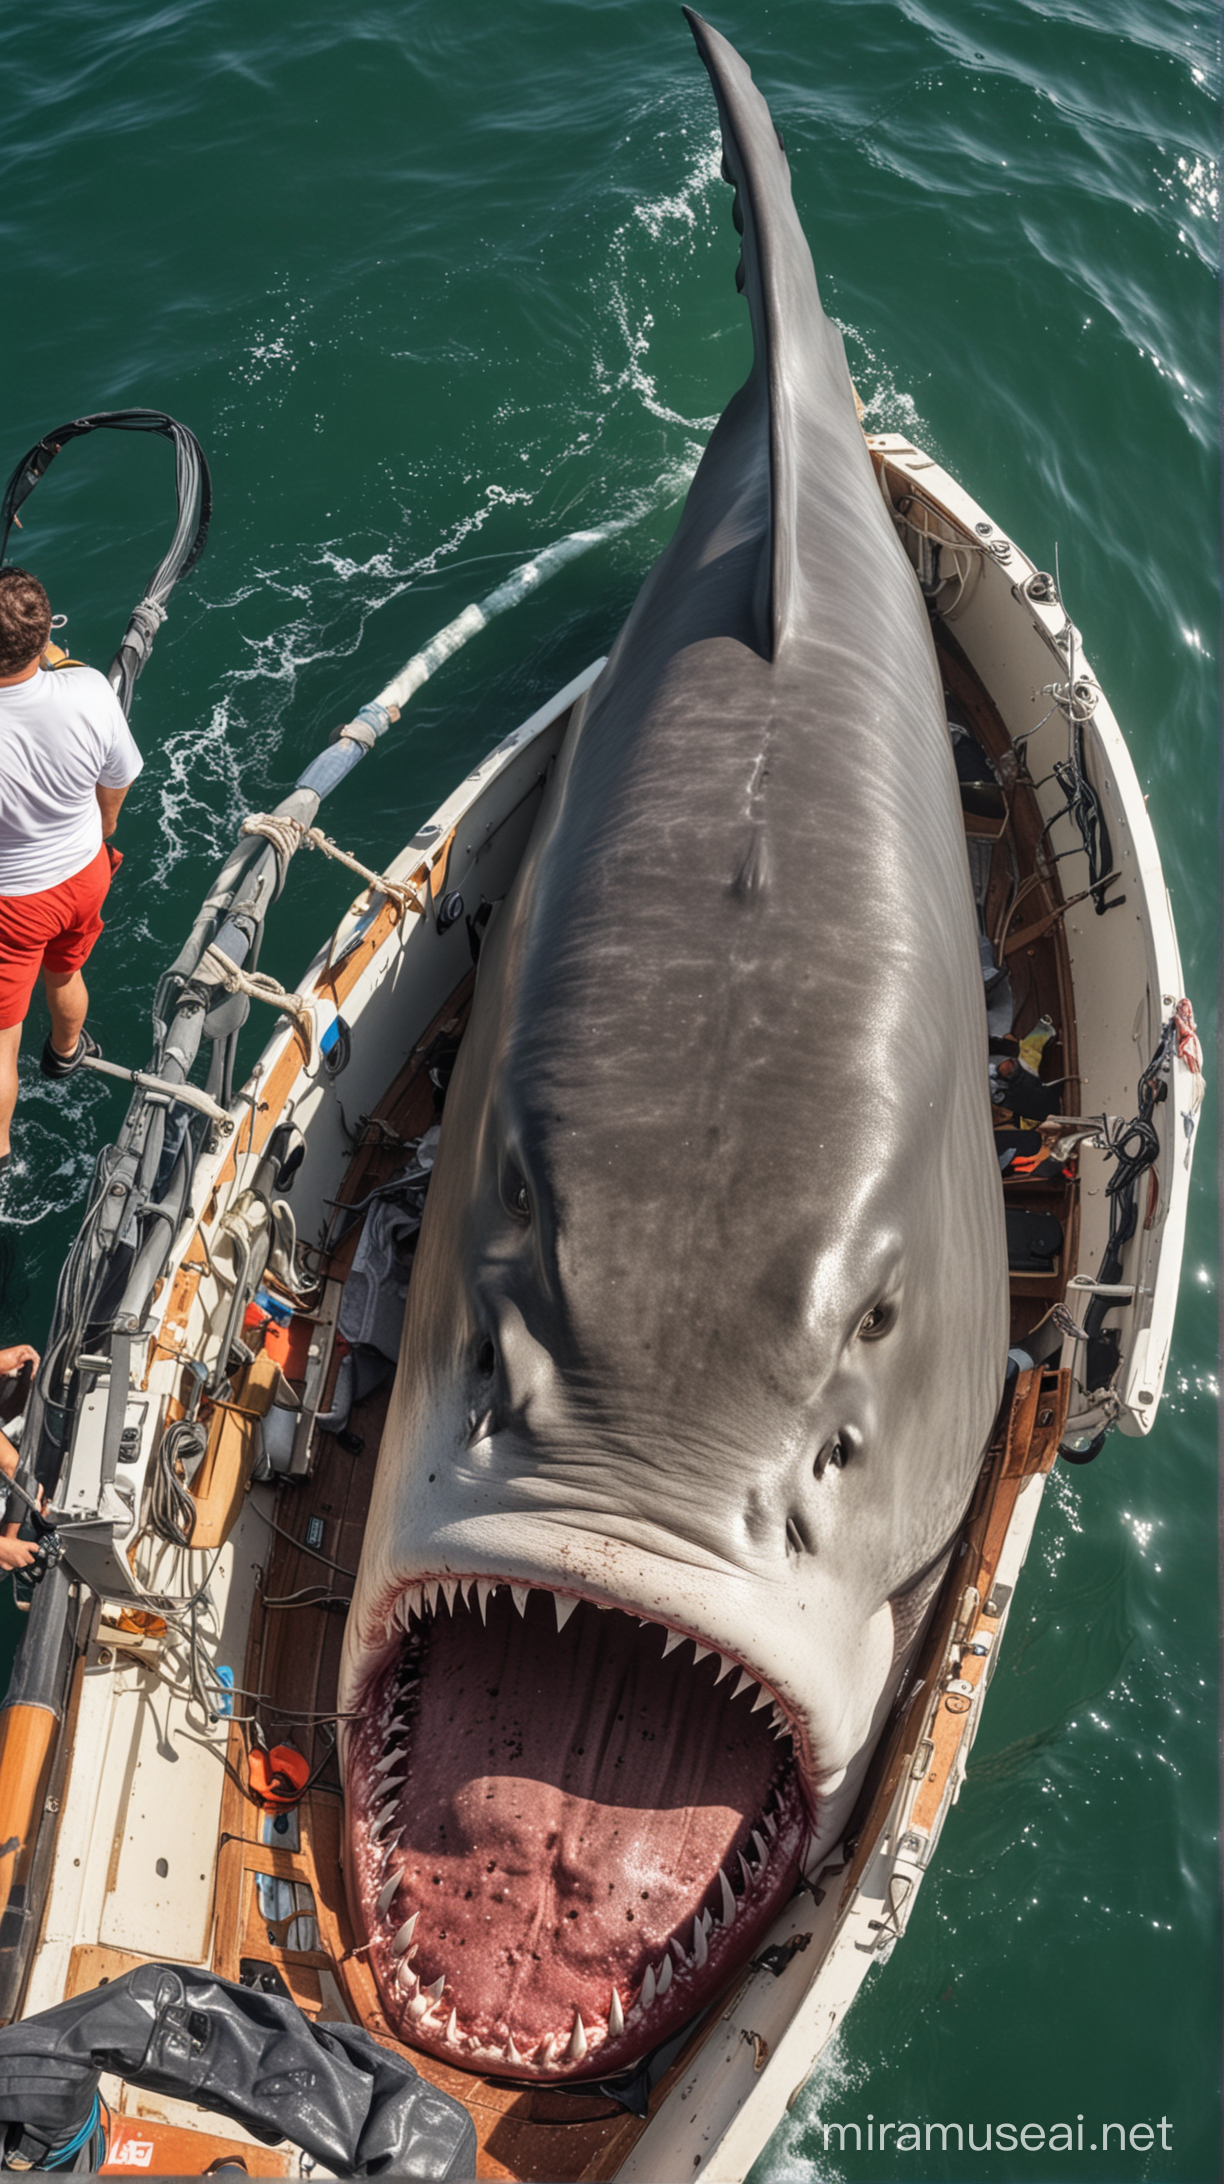 Unexpected Encounter Shark in Boat